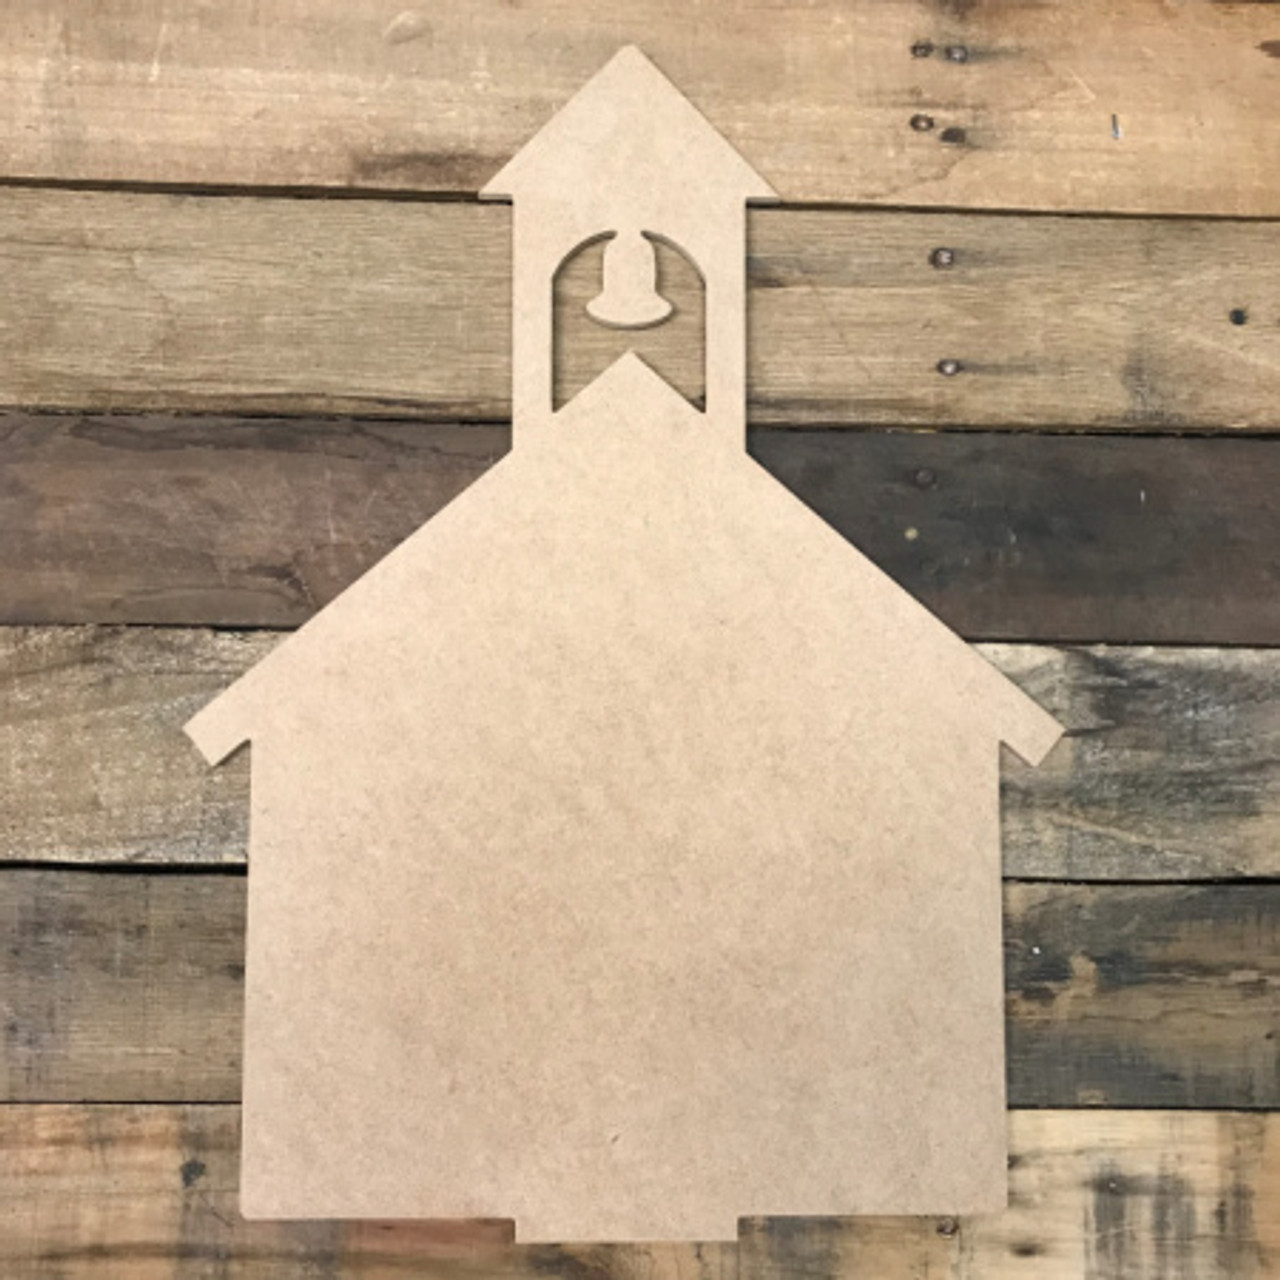 Unfinished Wood Cutout - 100-Pack Classic Cross Shaped Wood Pieces for  Wooden Craft DIY Projects, Sunday School, Church, Home Decoration, 4.1 x  2.6 x 0.1 Inches